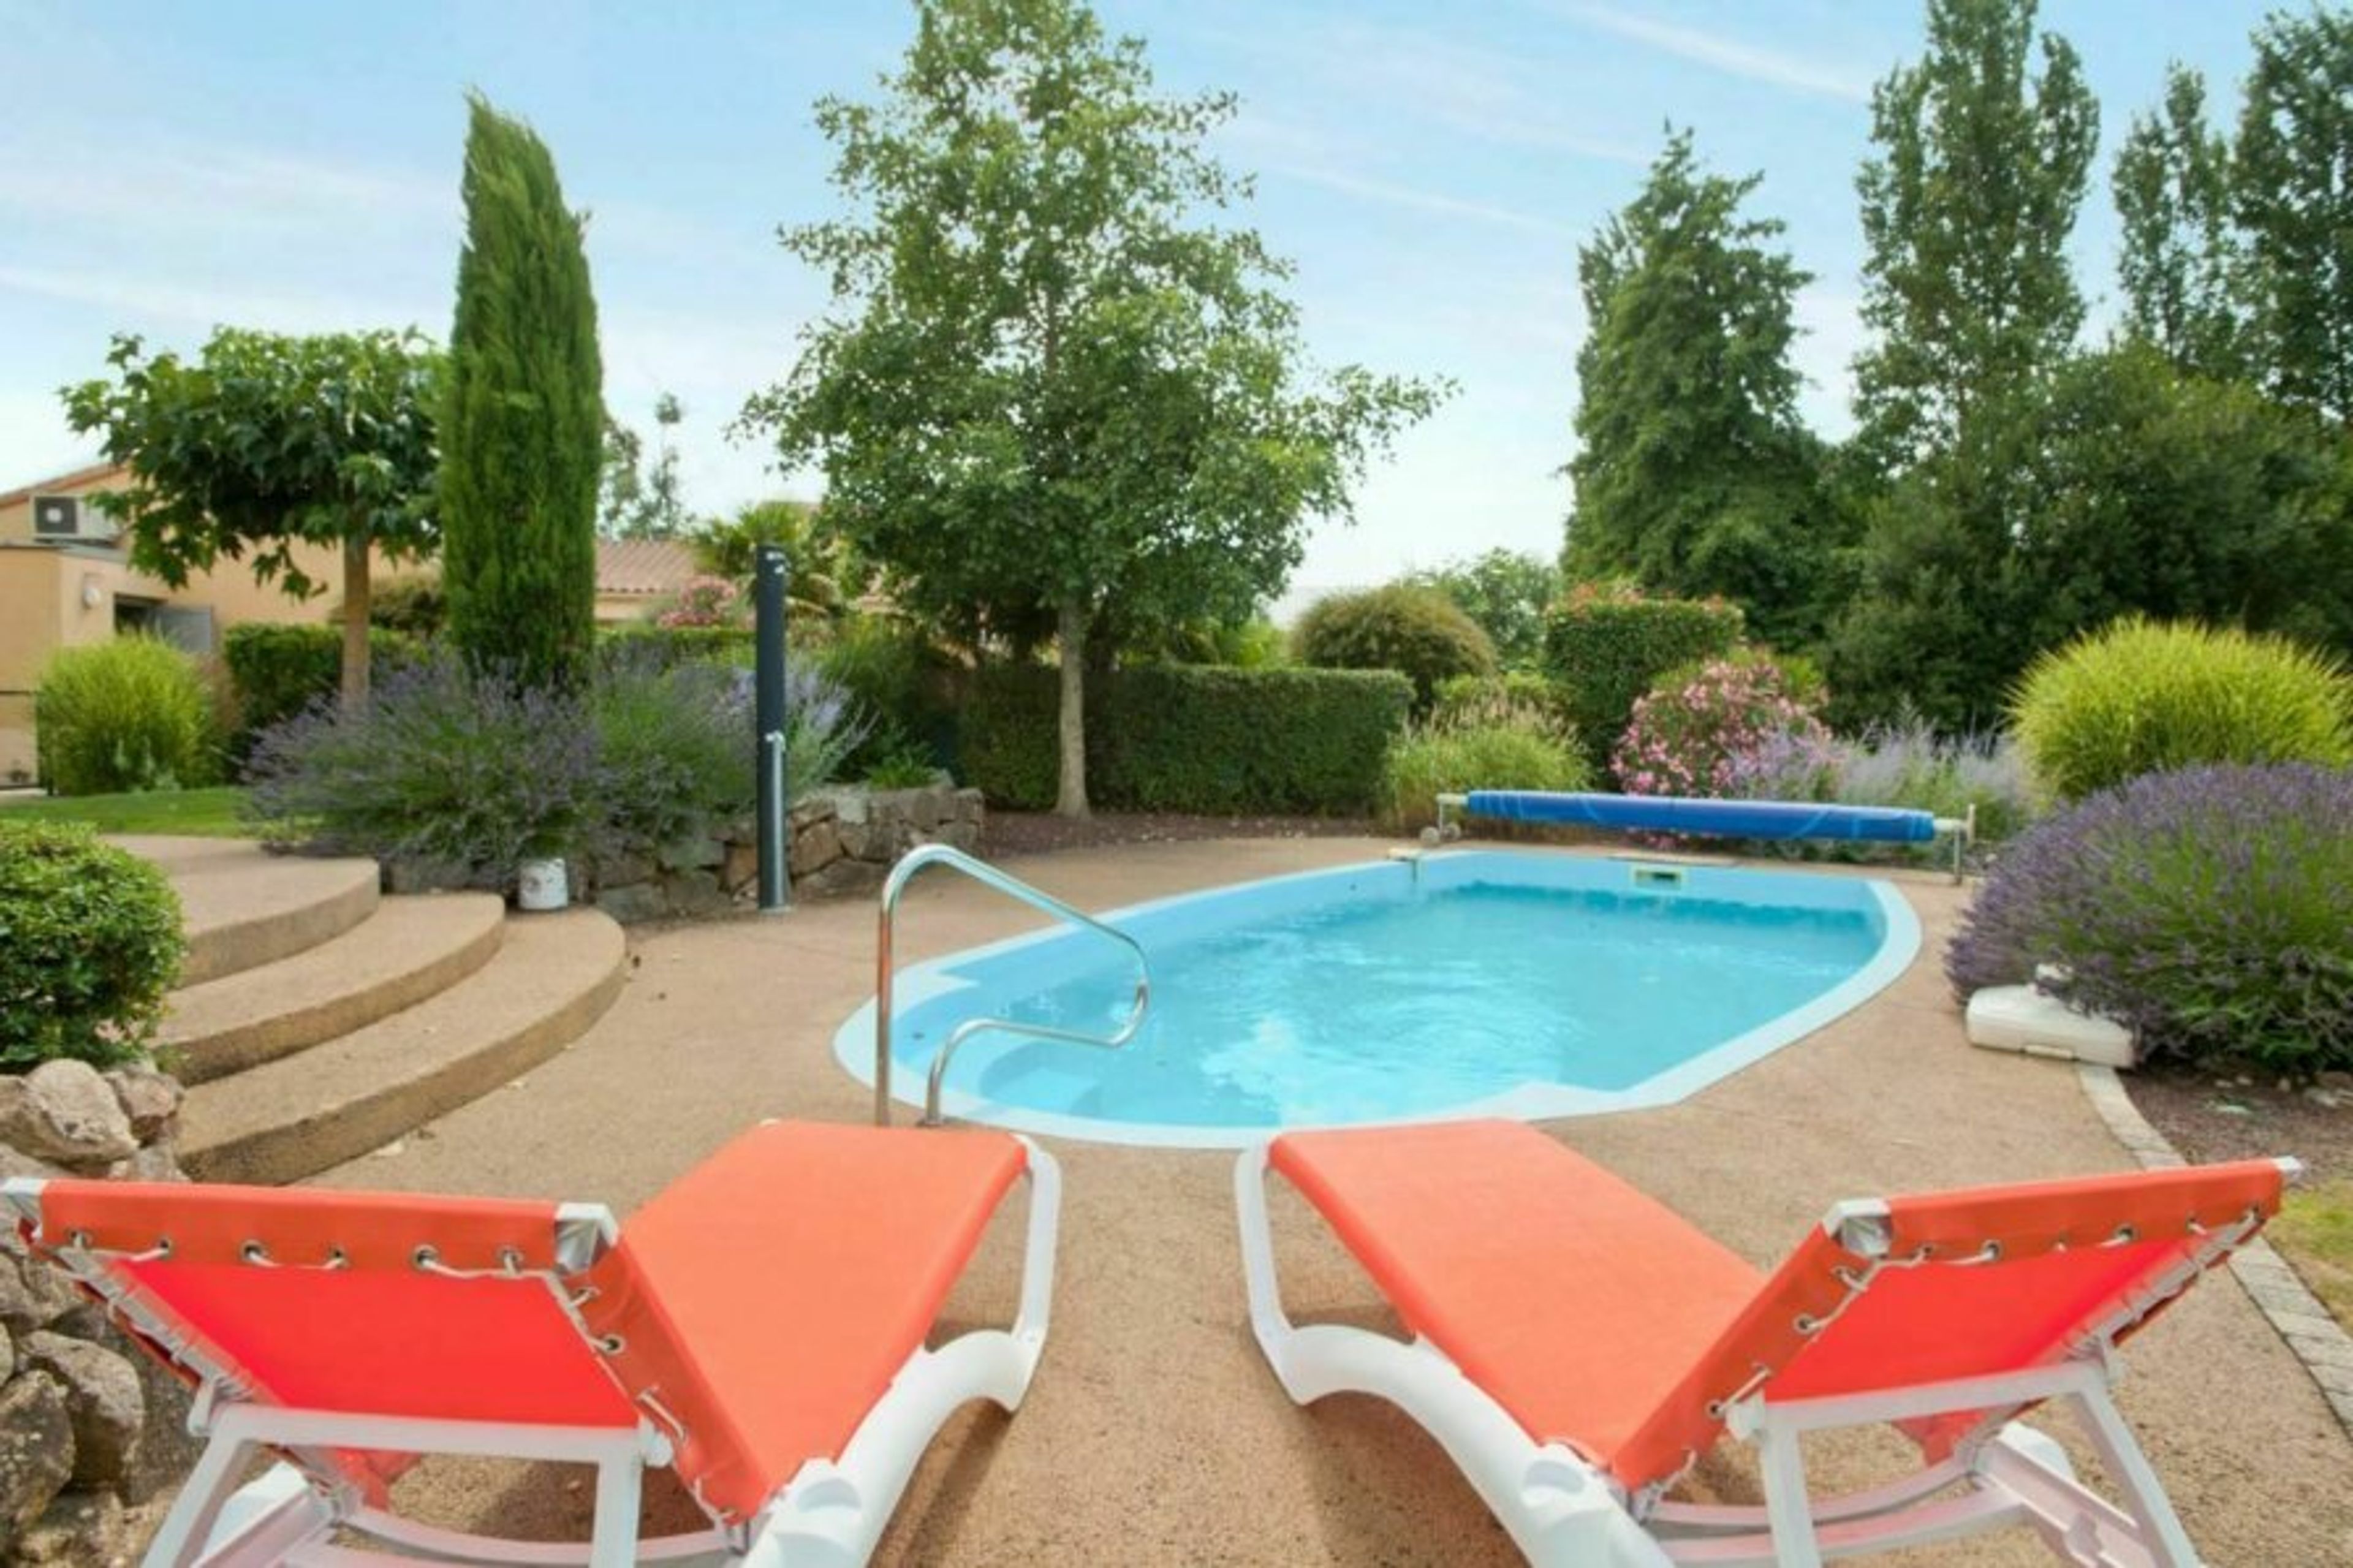 Photo of a pool shown as example. Actual pool and garden may vary.